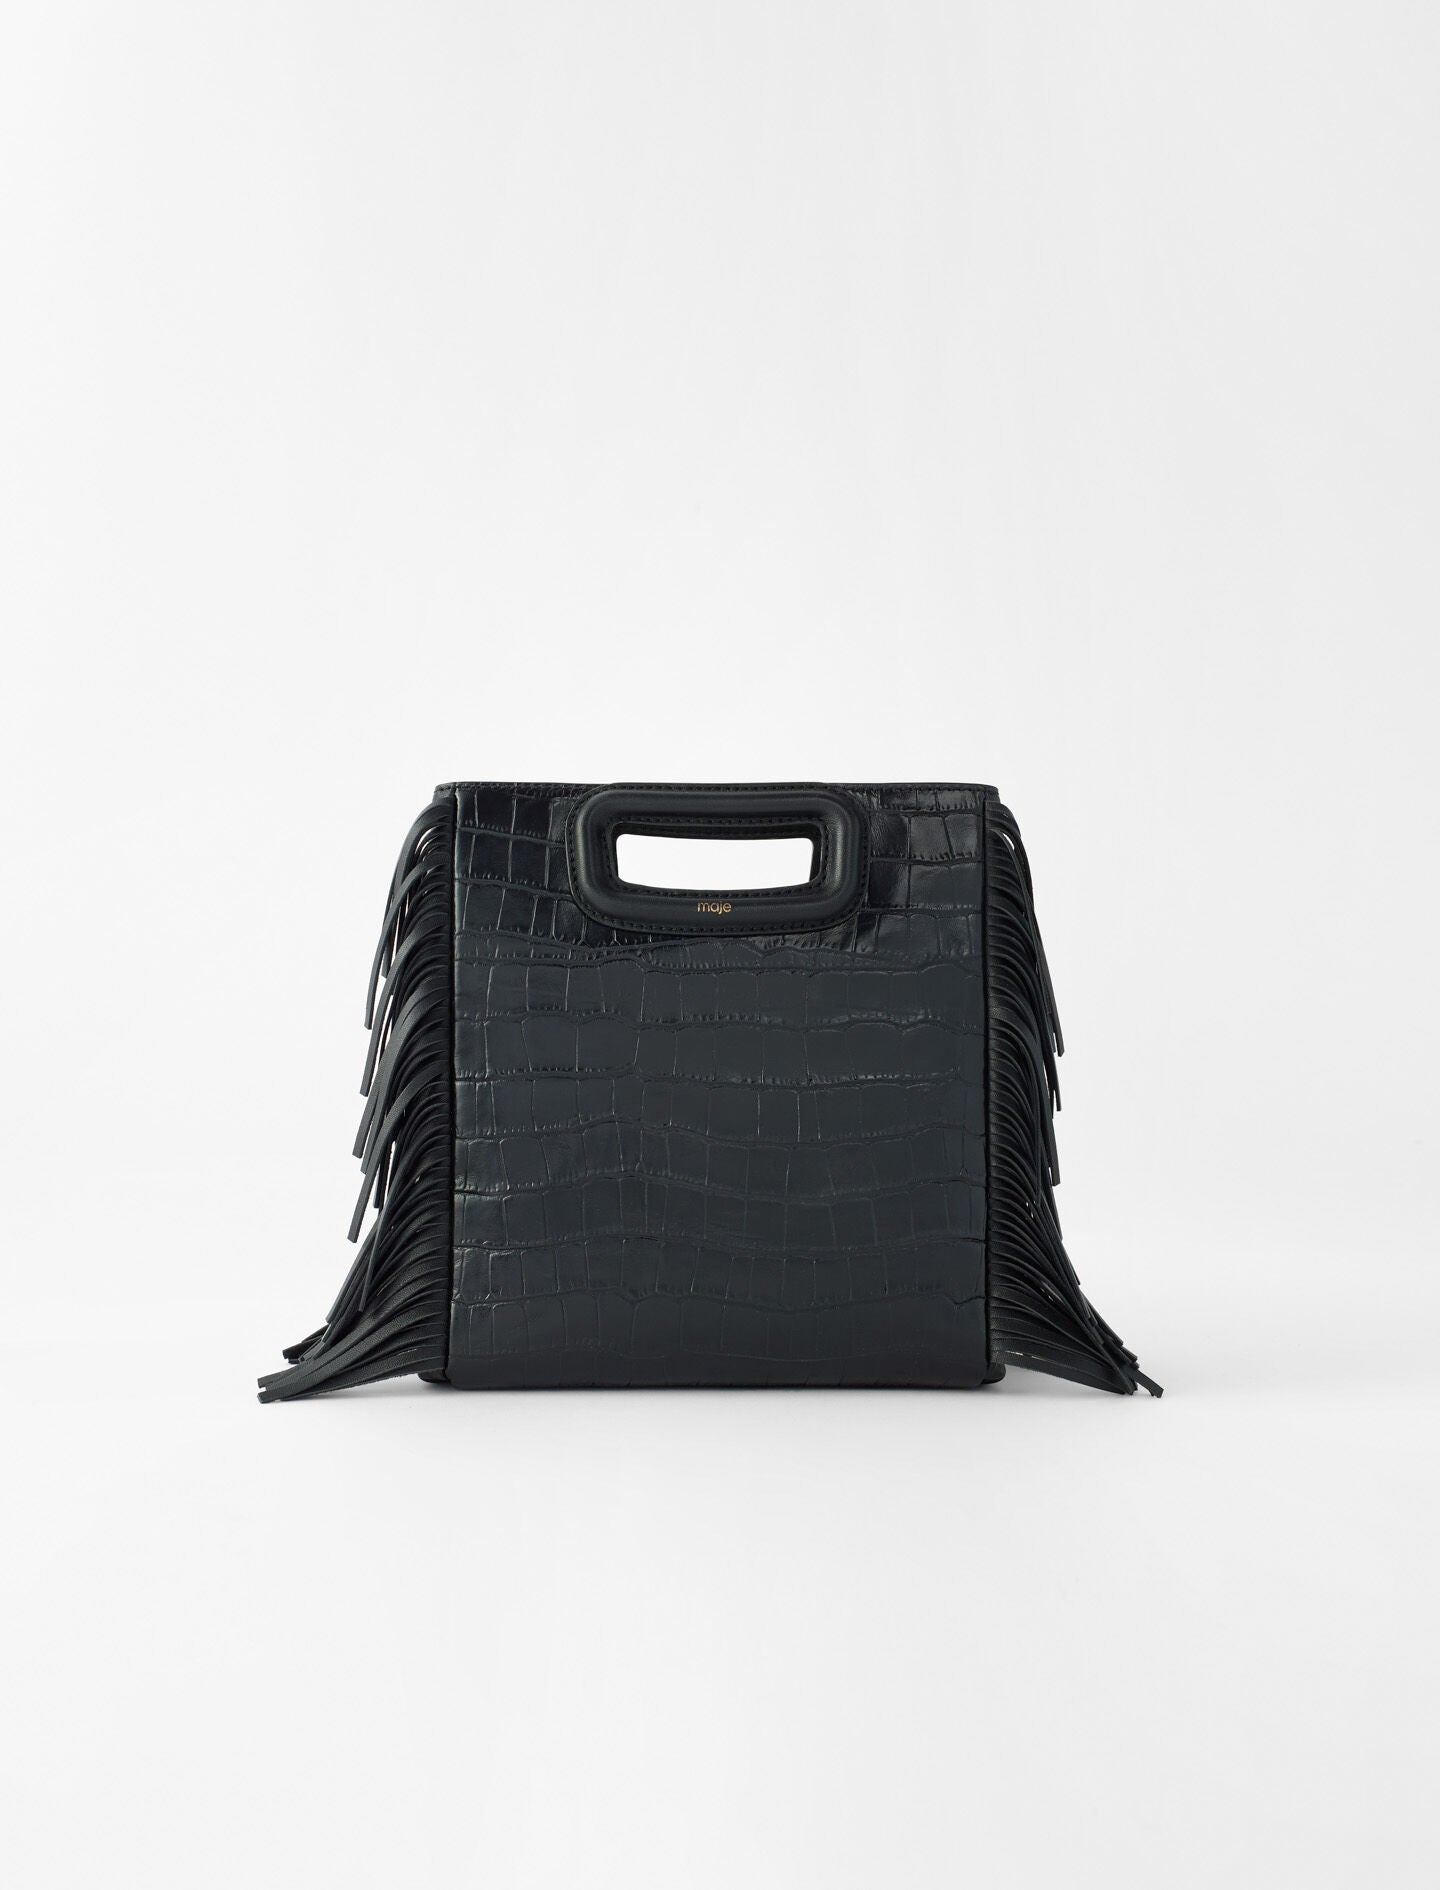 Black-featured-fringed leather m bag